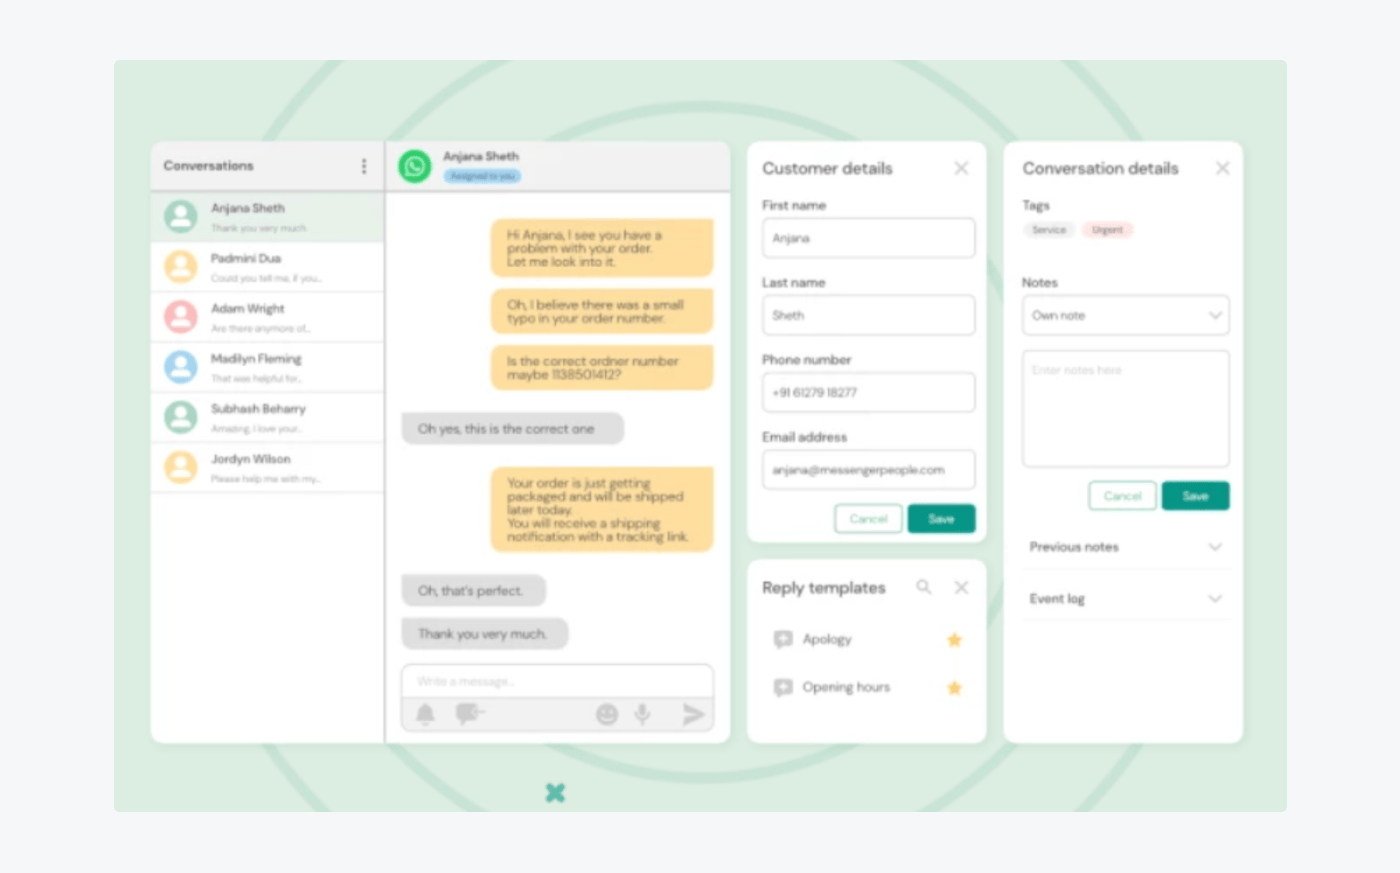 Sinch Engage's WhatsApp chatbot tool